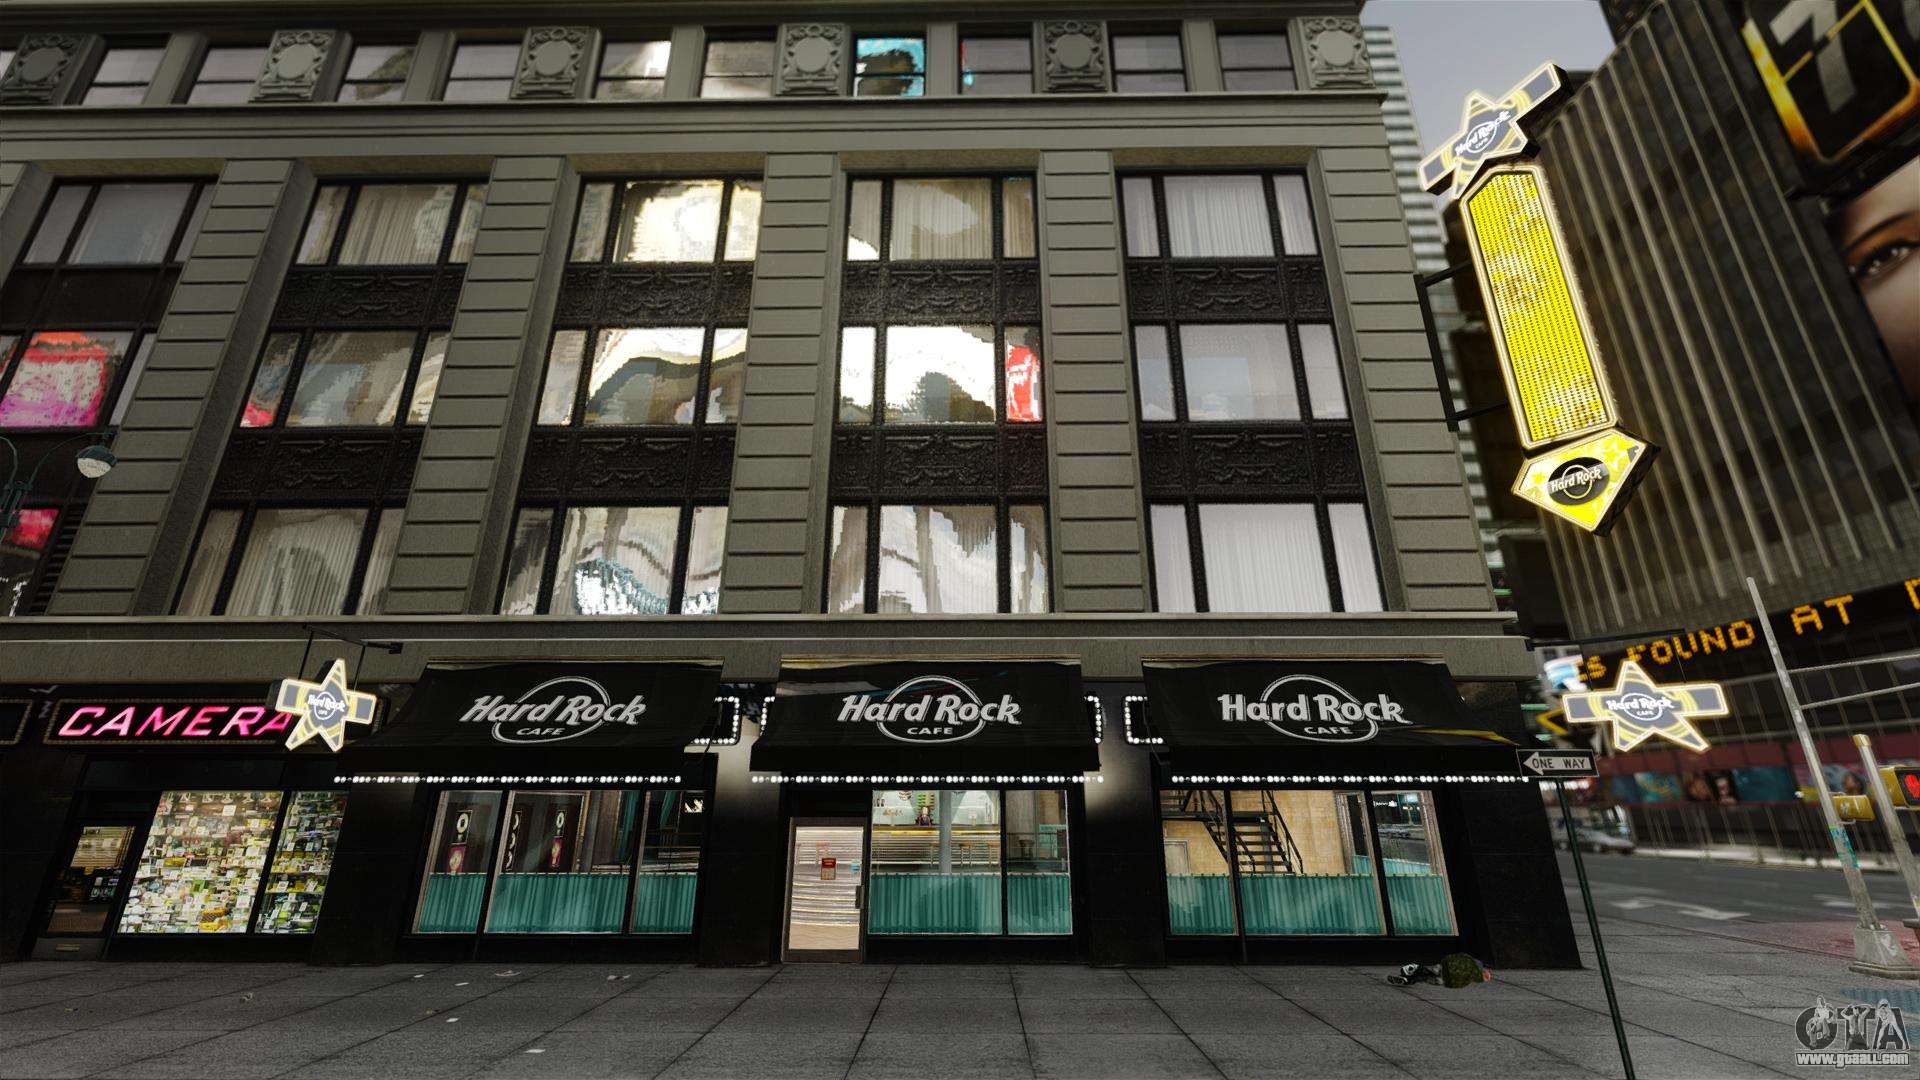 The Hard Rock cafe in times square for GTA 4